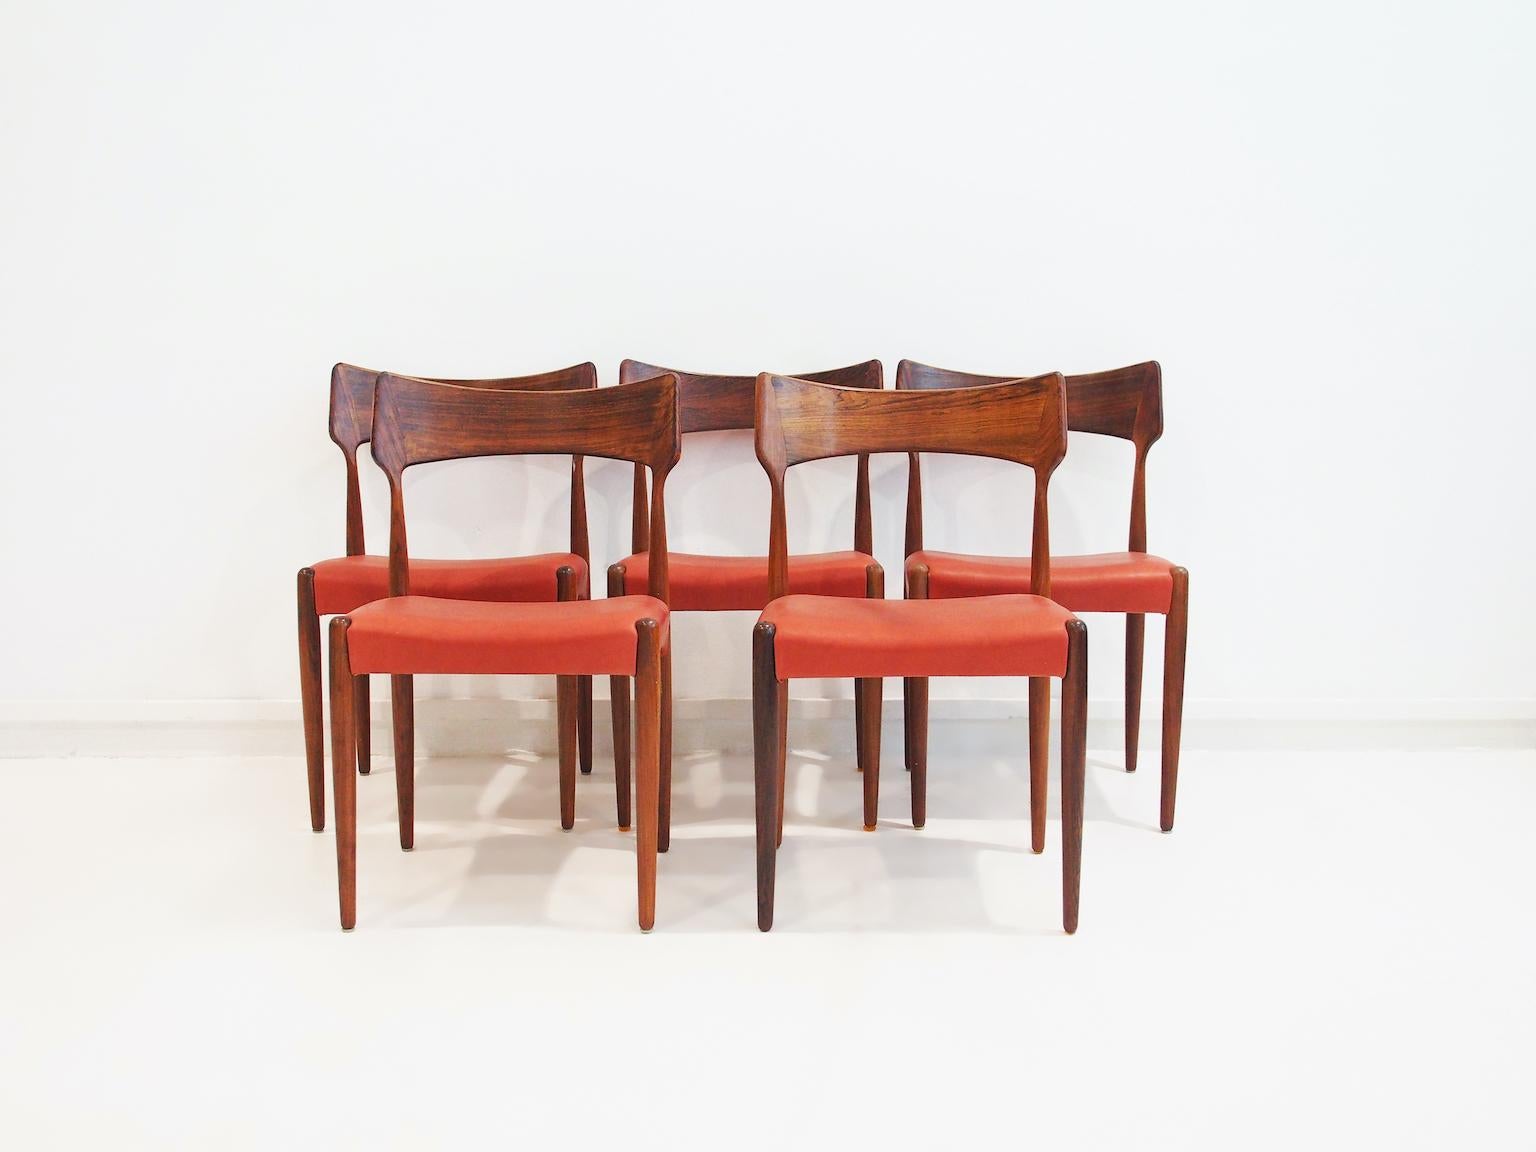 Bernhard Petersen & Son chairs, produced by Christian Linneberg's furniture factory in Denmark. There are five available, price per chair. Seats upholstered in aniline leather in dark red with orange hues (looking a bit more orange on photos and